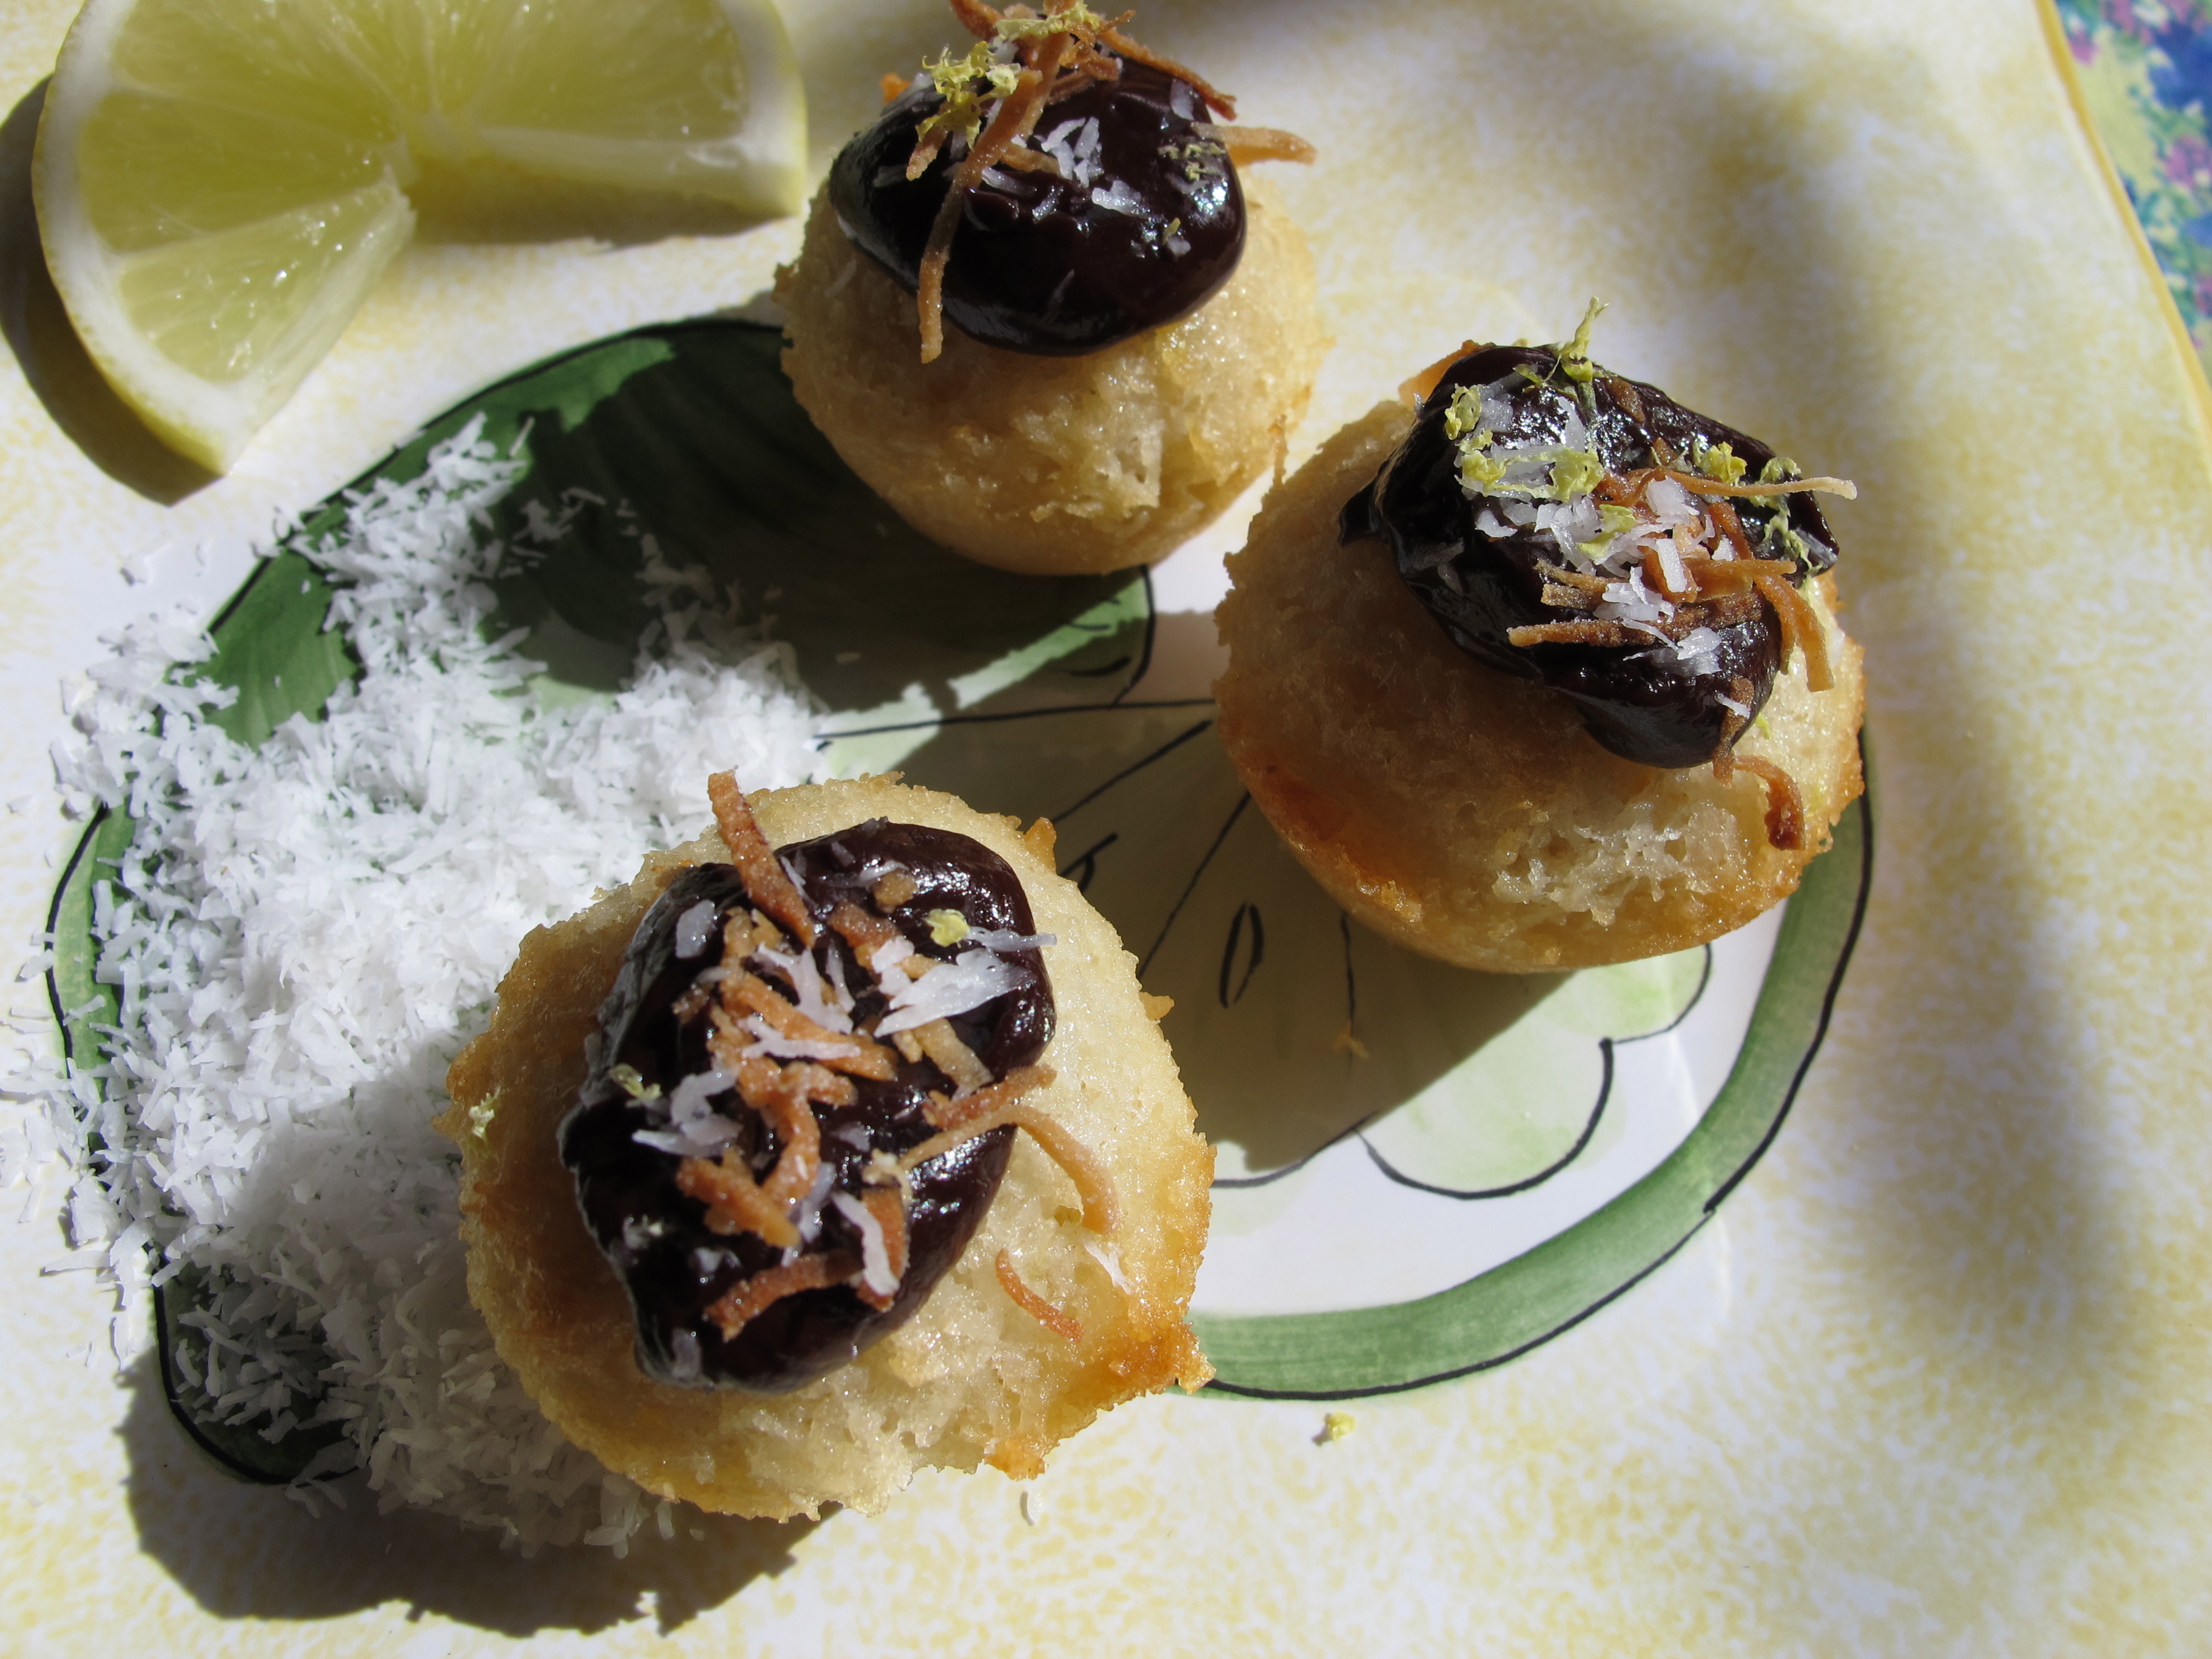 3 friands on a plate with shredded coconut and a slice of lime.